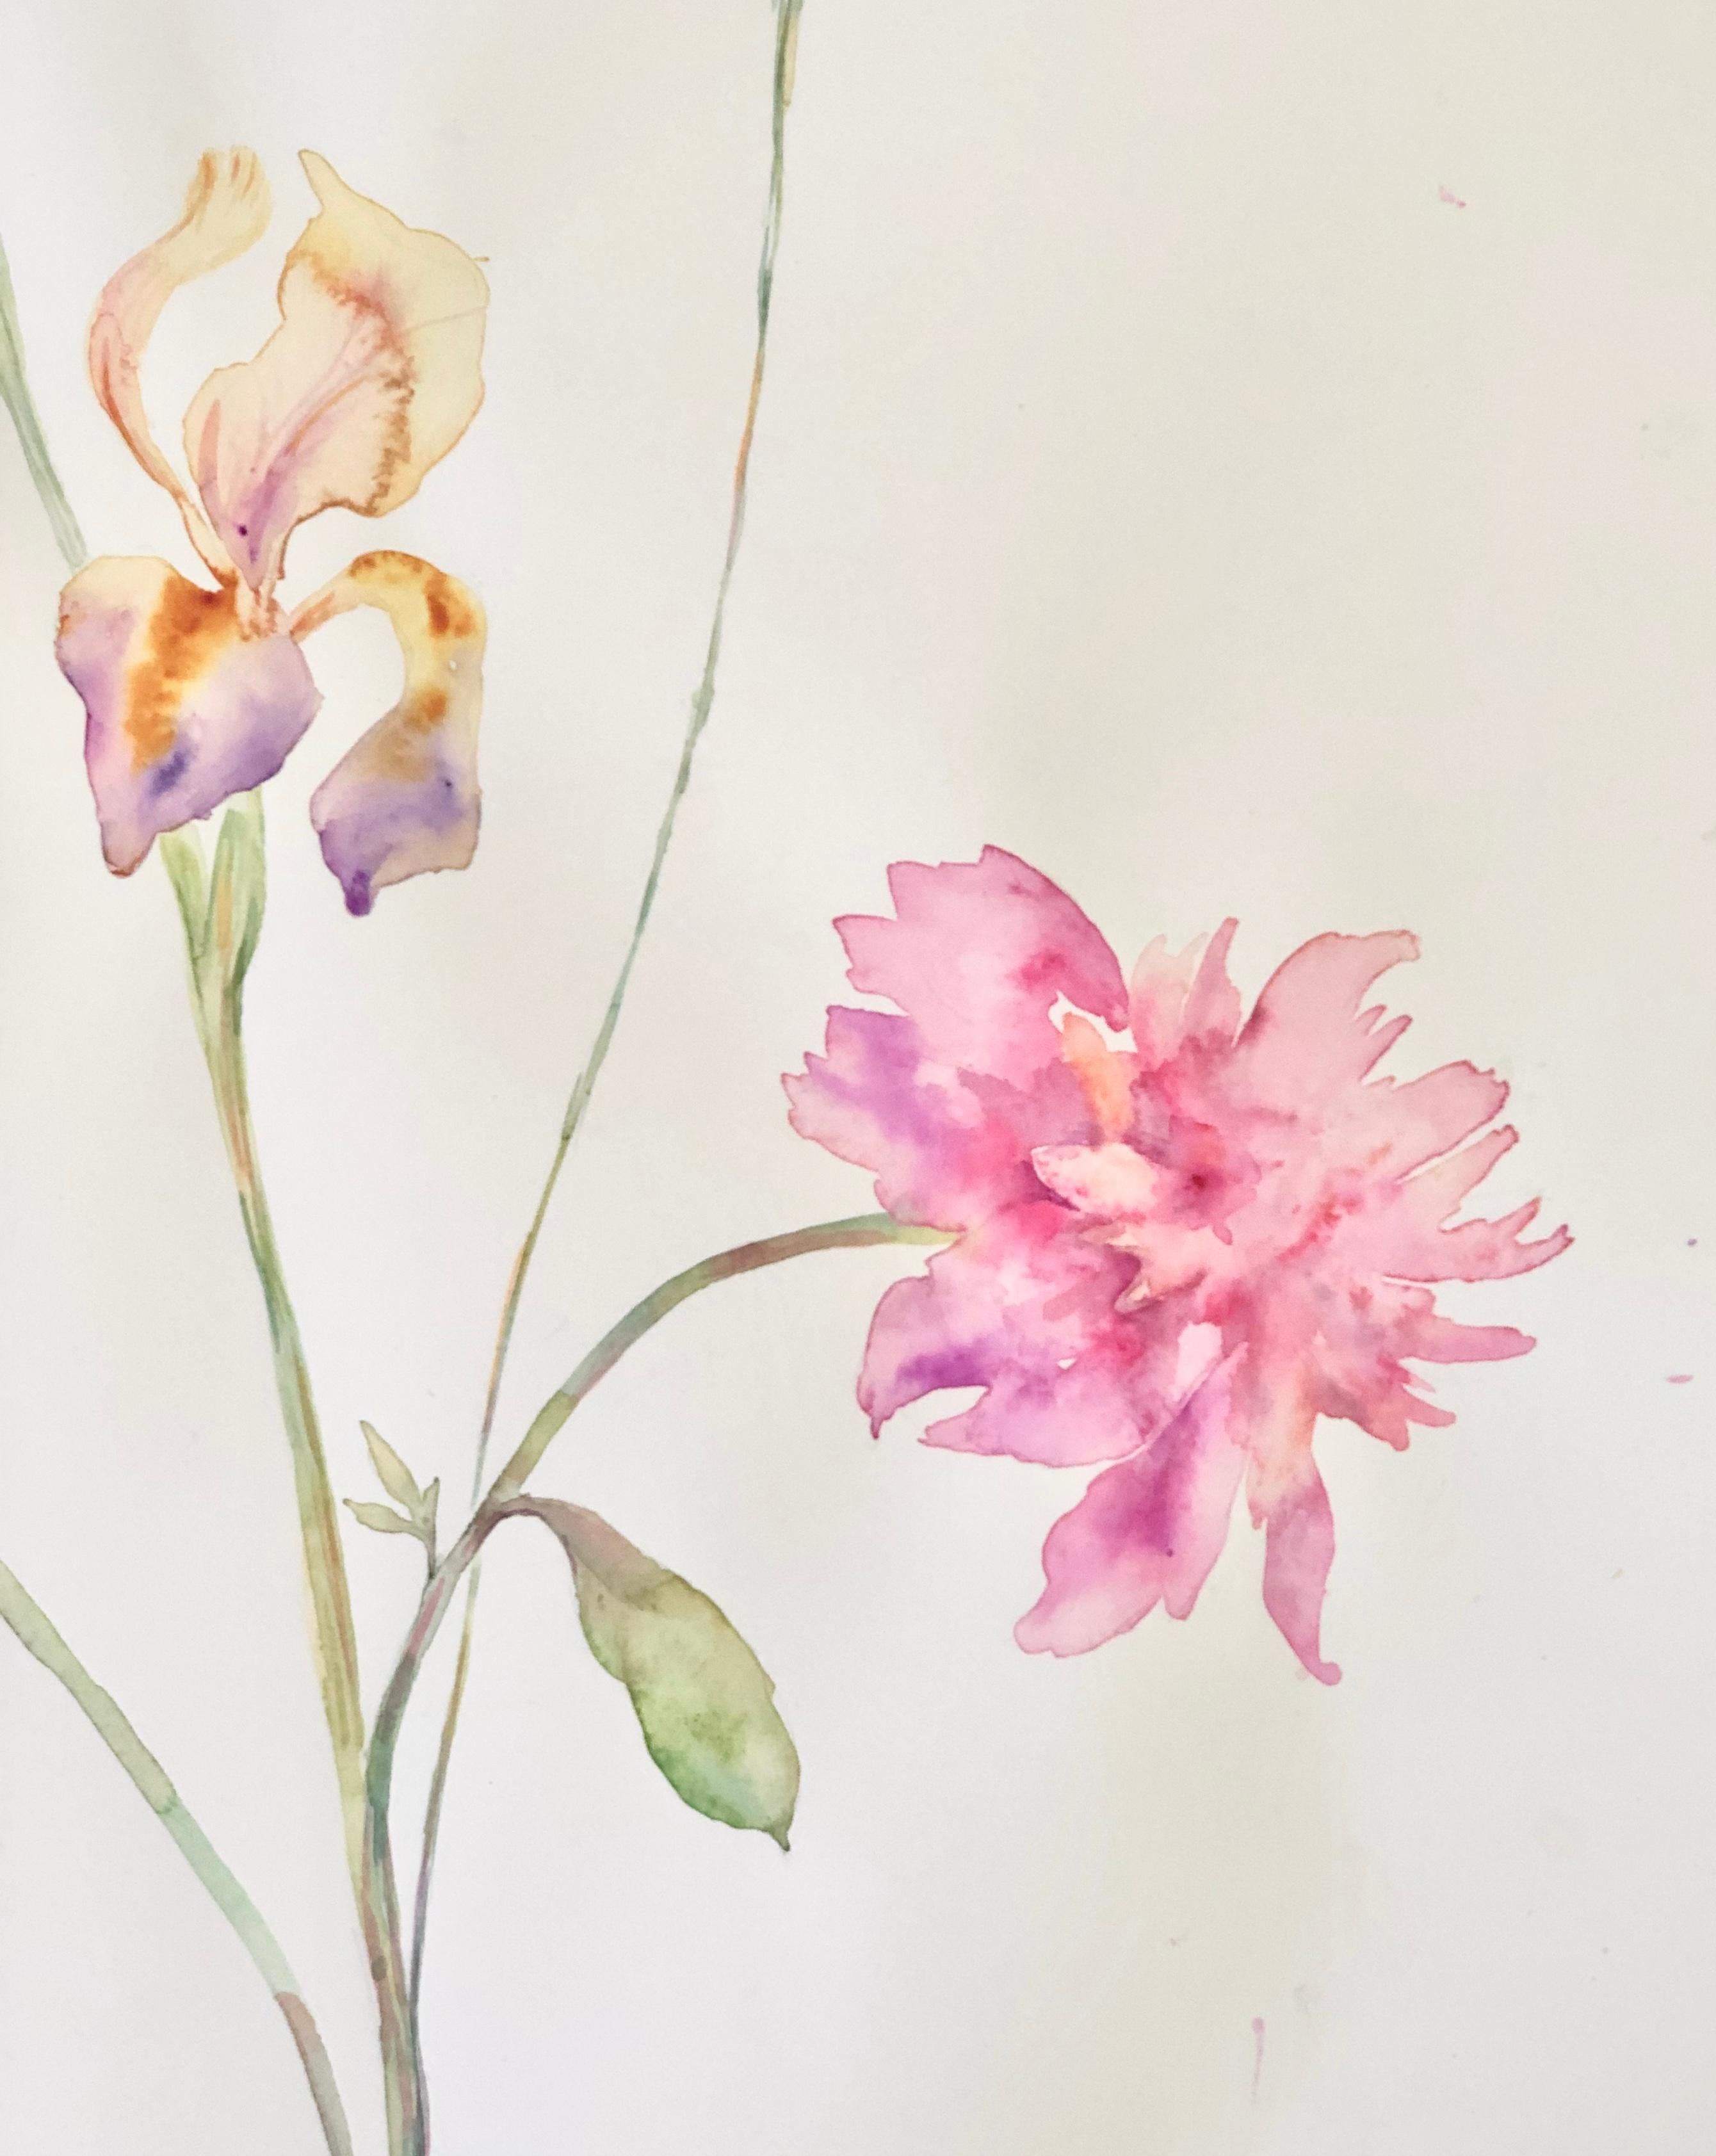 Marilla Palmer
Soft Iris and Peony, 2020
watercolor, silk, sequins on Arches paper
30 x 22 in.
(pal191)

This original artwork by Marilla Palmer is a twist on the traditional Victorian botanical drawing, delicately painted with watercolor and